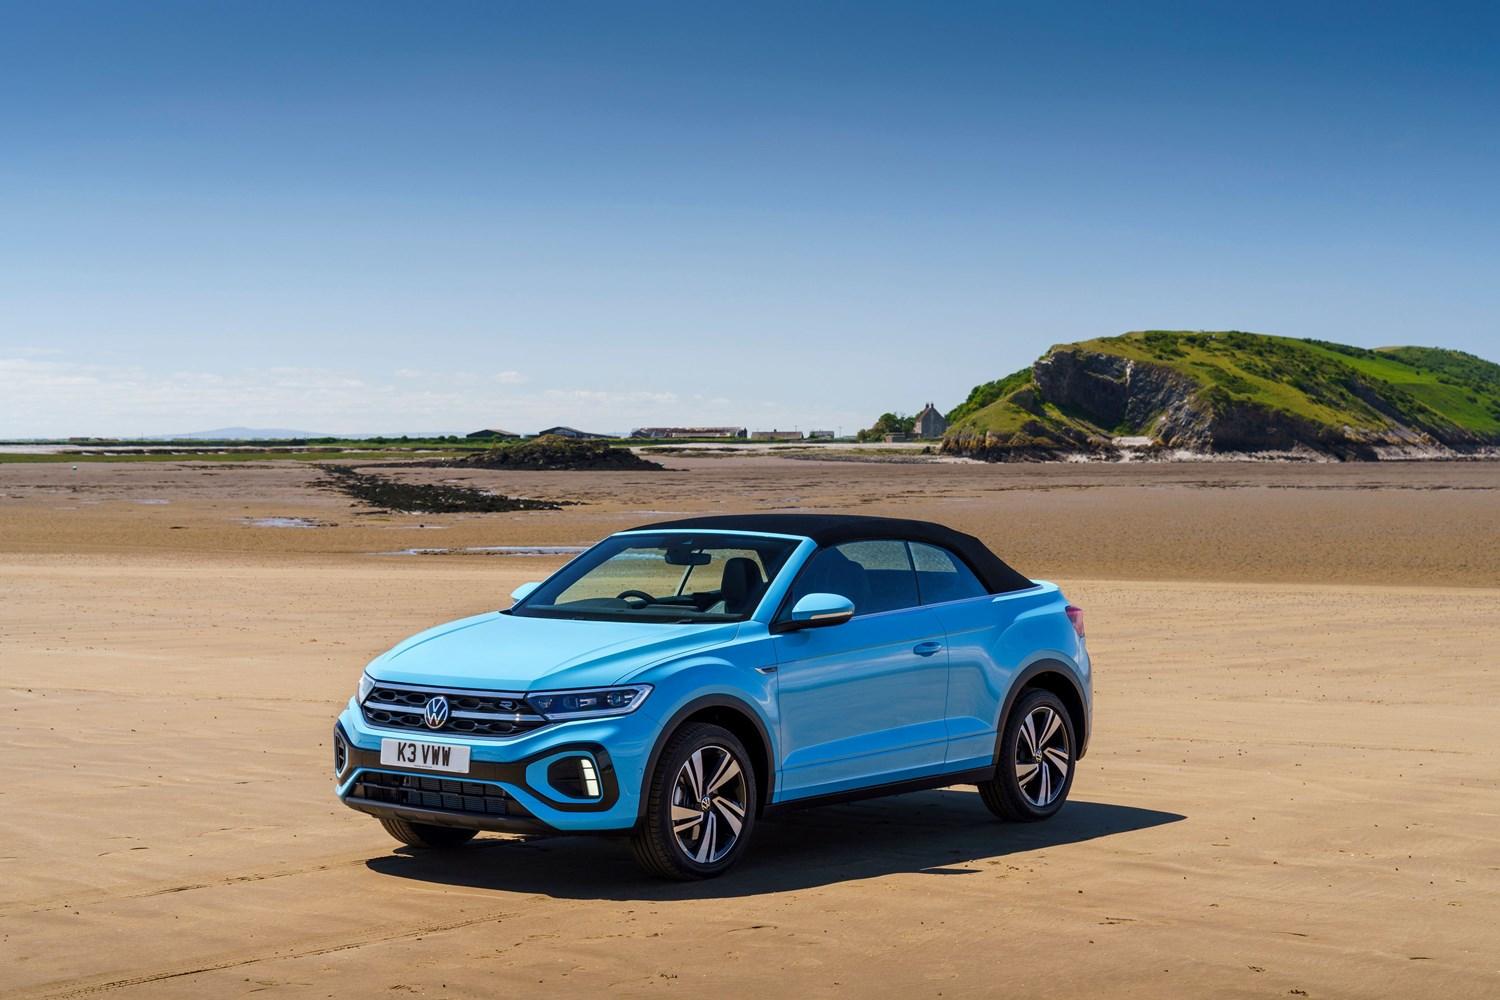 Side view of the new Volkswagen T-Roc Cabriolet in blue, parked on beach with green hills behind